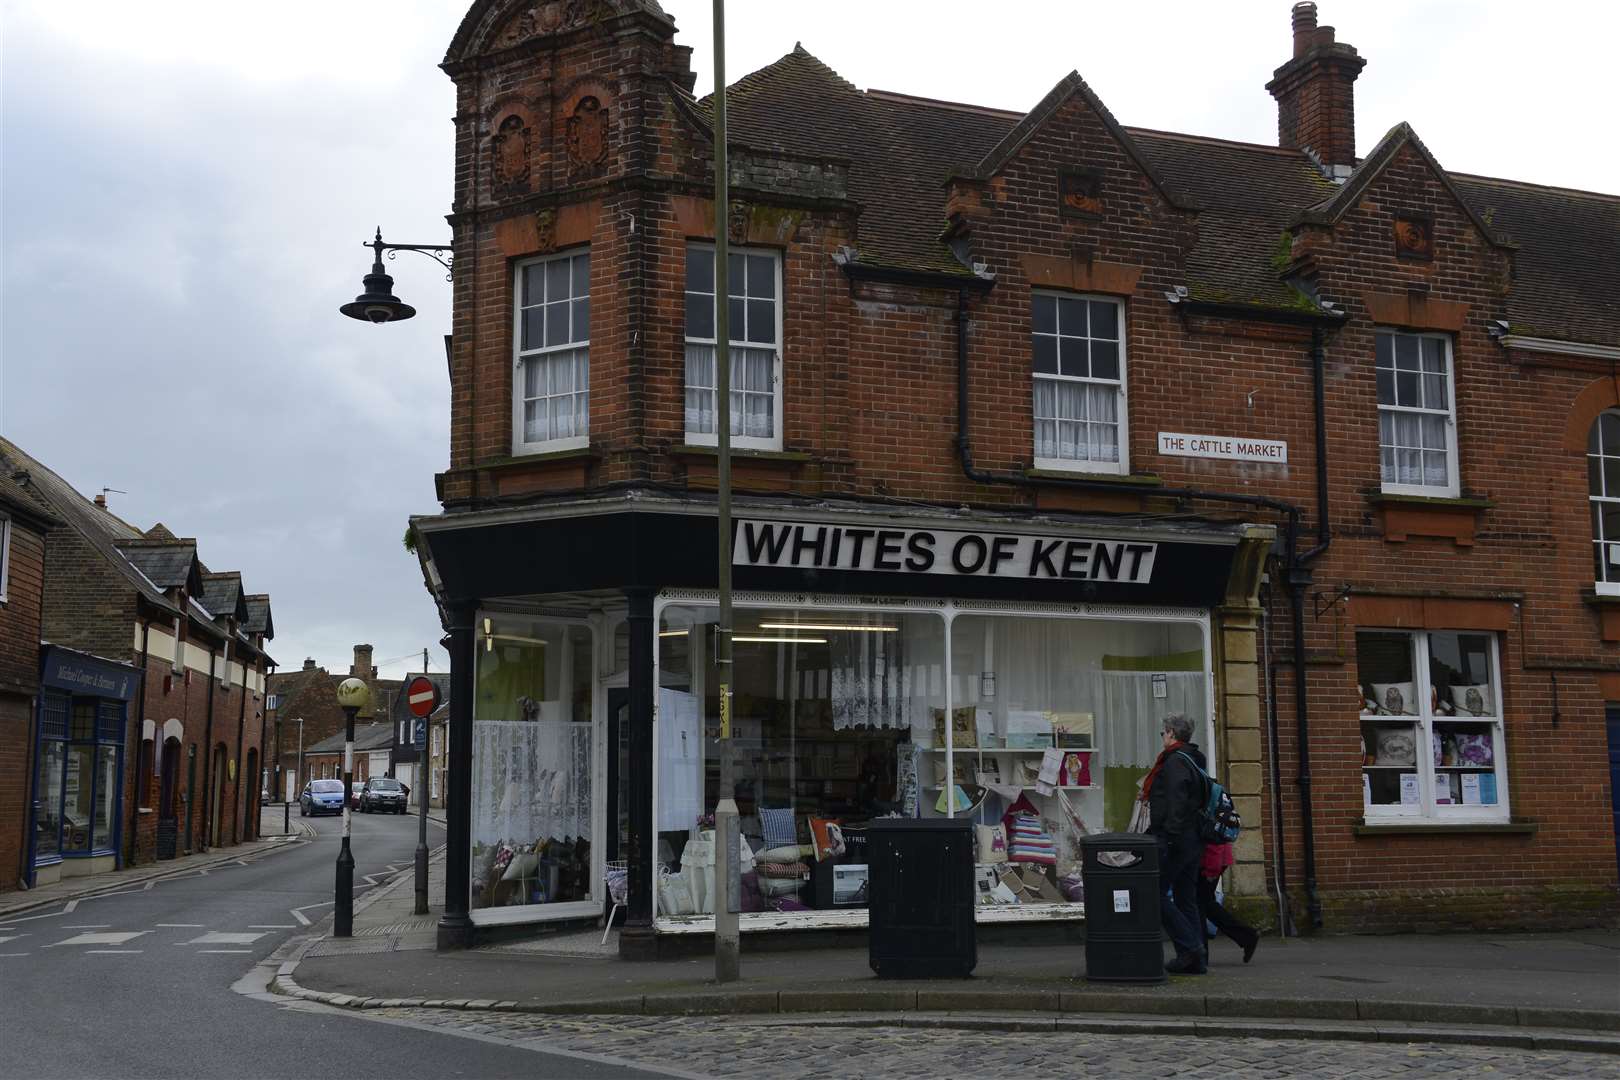 Whites of Kent could turn into a Costa